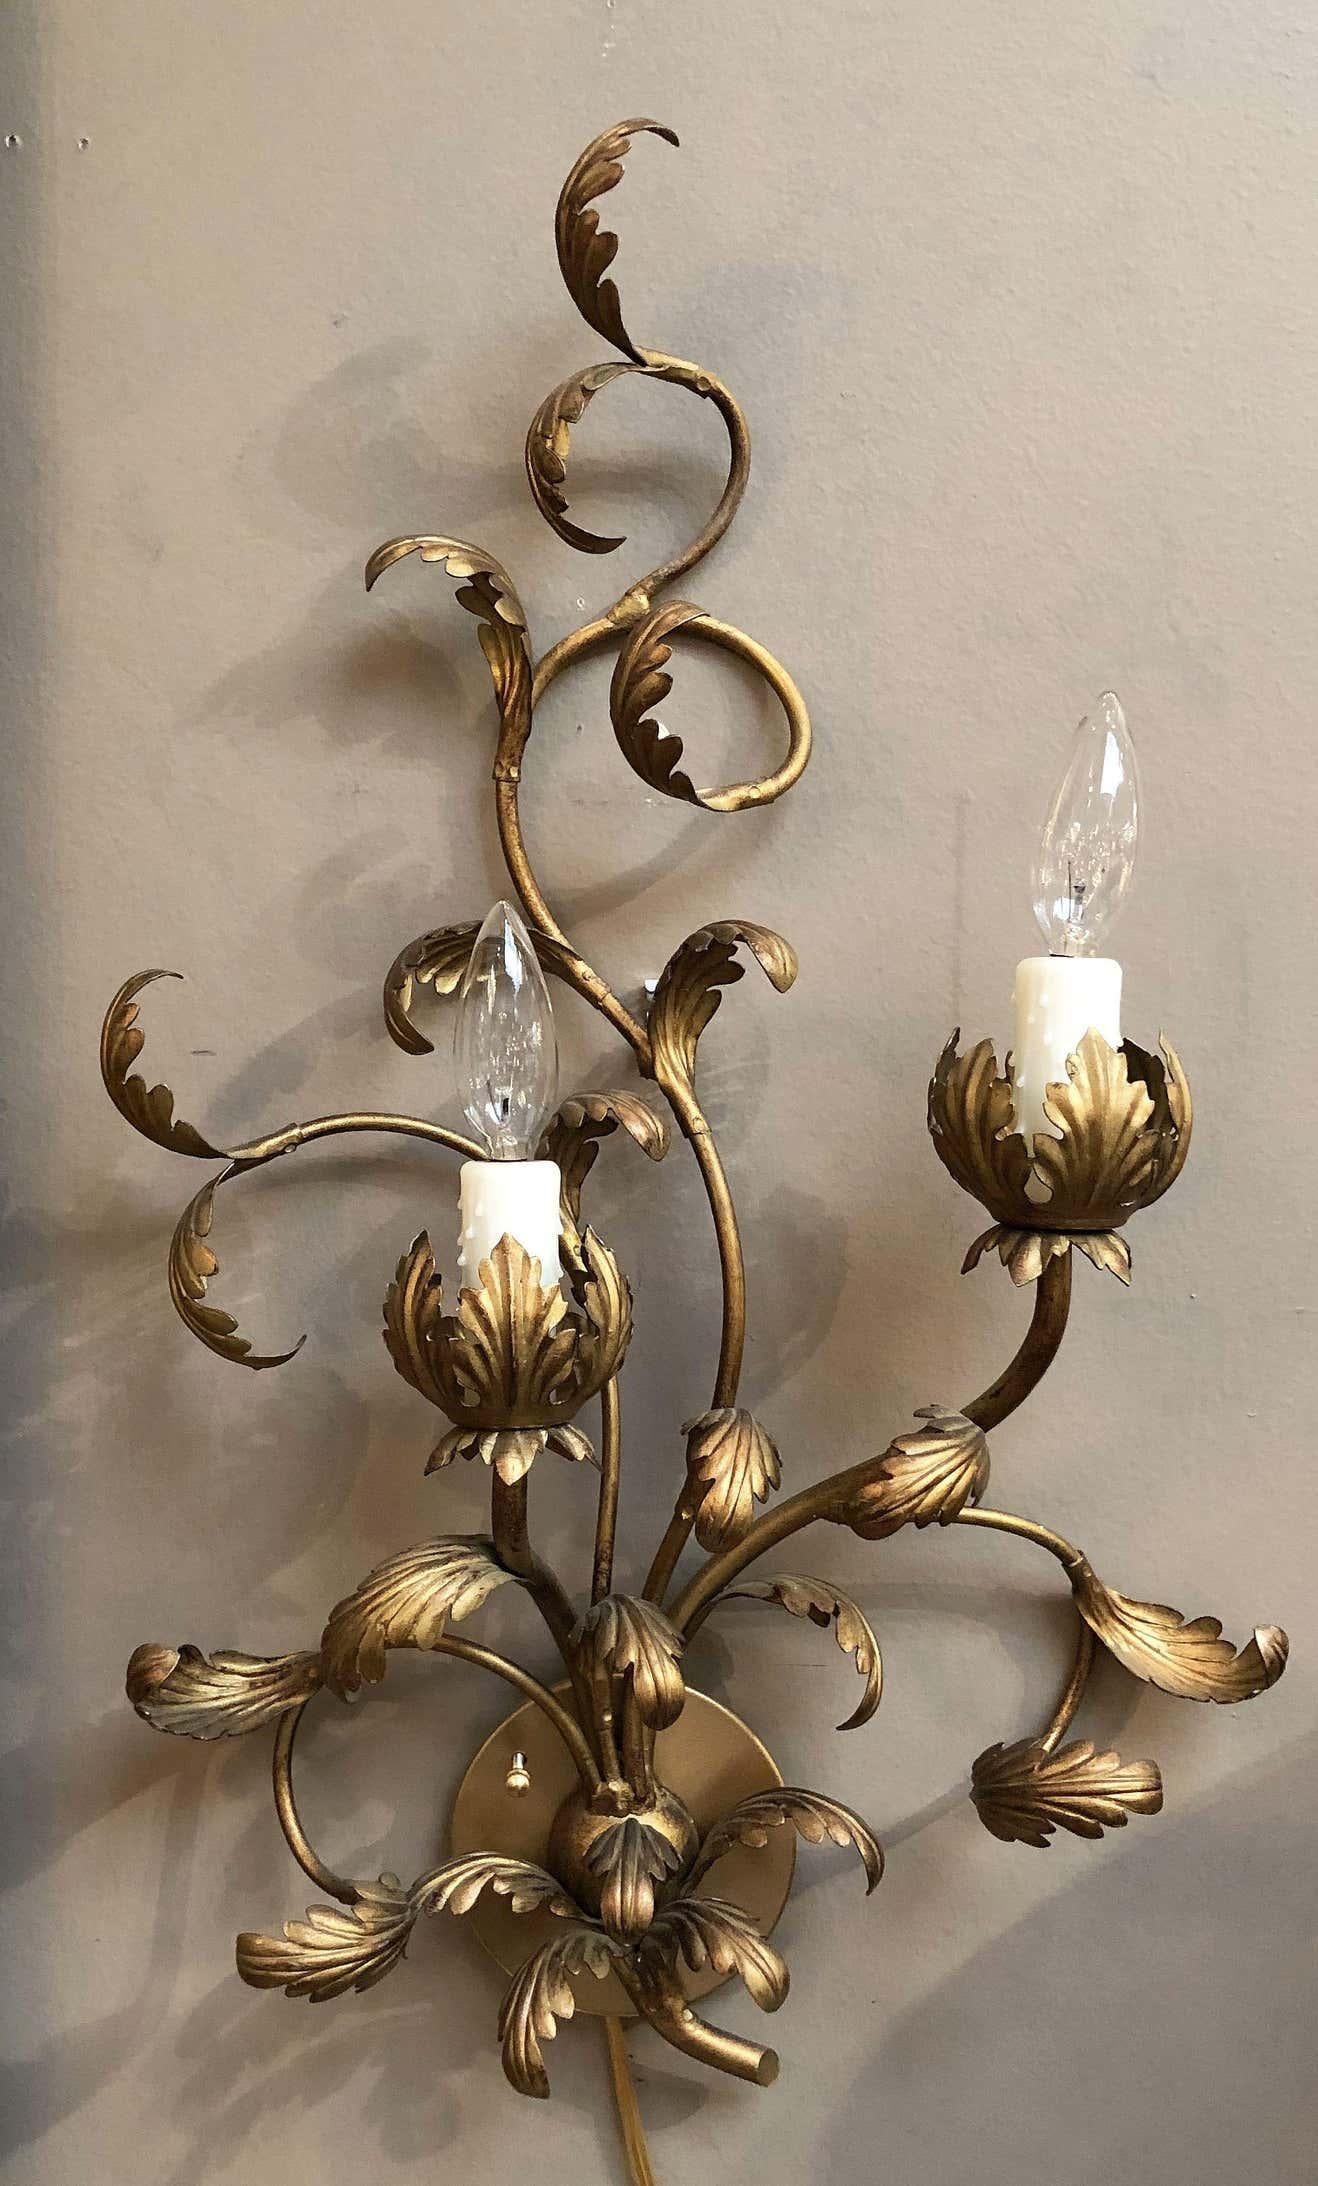 A handsome Italian wall light or sconce from the late 19th century. Art Nouveau period, in the form of entwined leaves with two branches to form two lights.

U.S. wired and ready for display.




